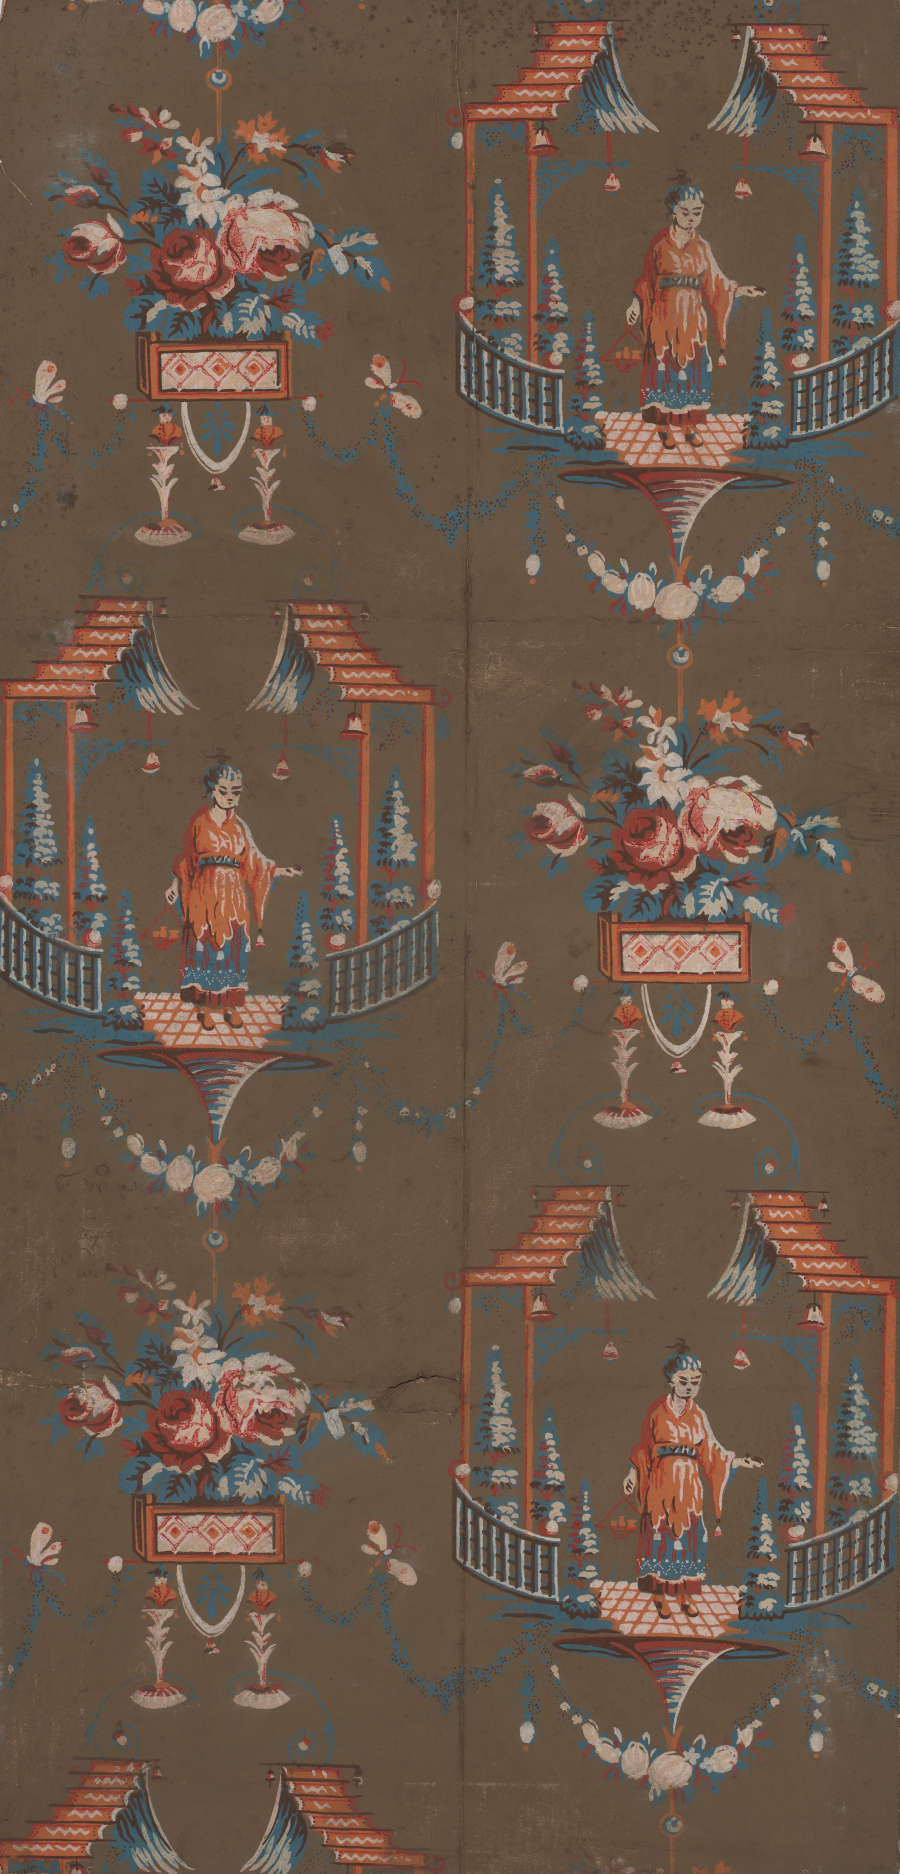 Narrow panel of vintage wallpaper featuring a pattern of figures in pagodas wearing traditional orange robes. The design is accented with ornamental shapes and set against a brown-gray background.